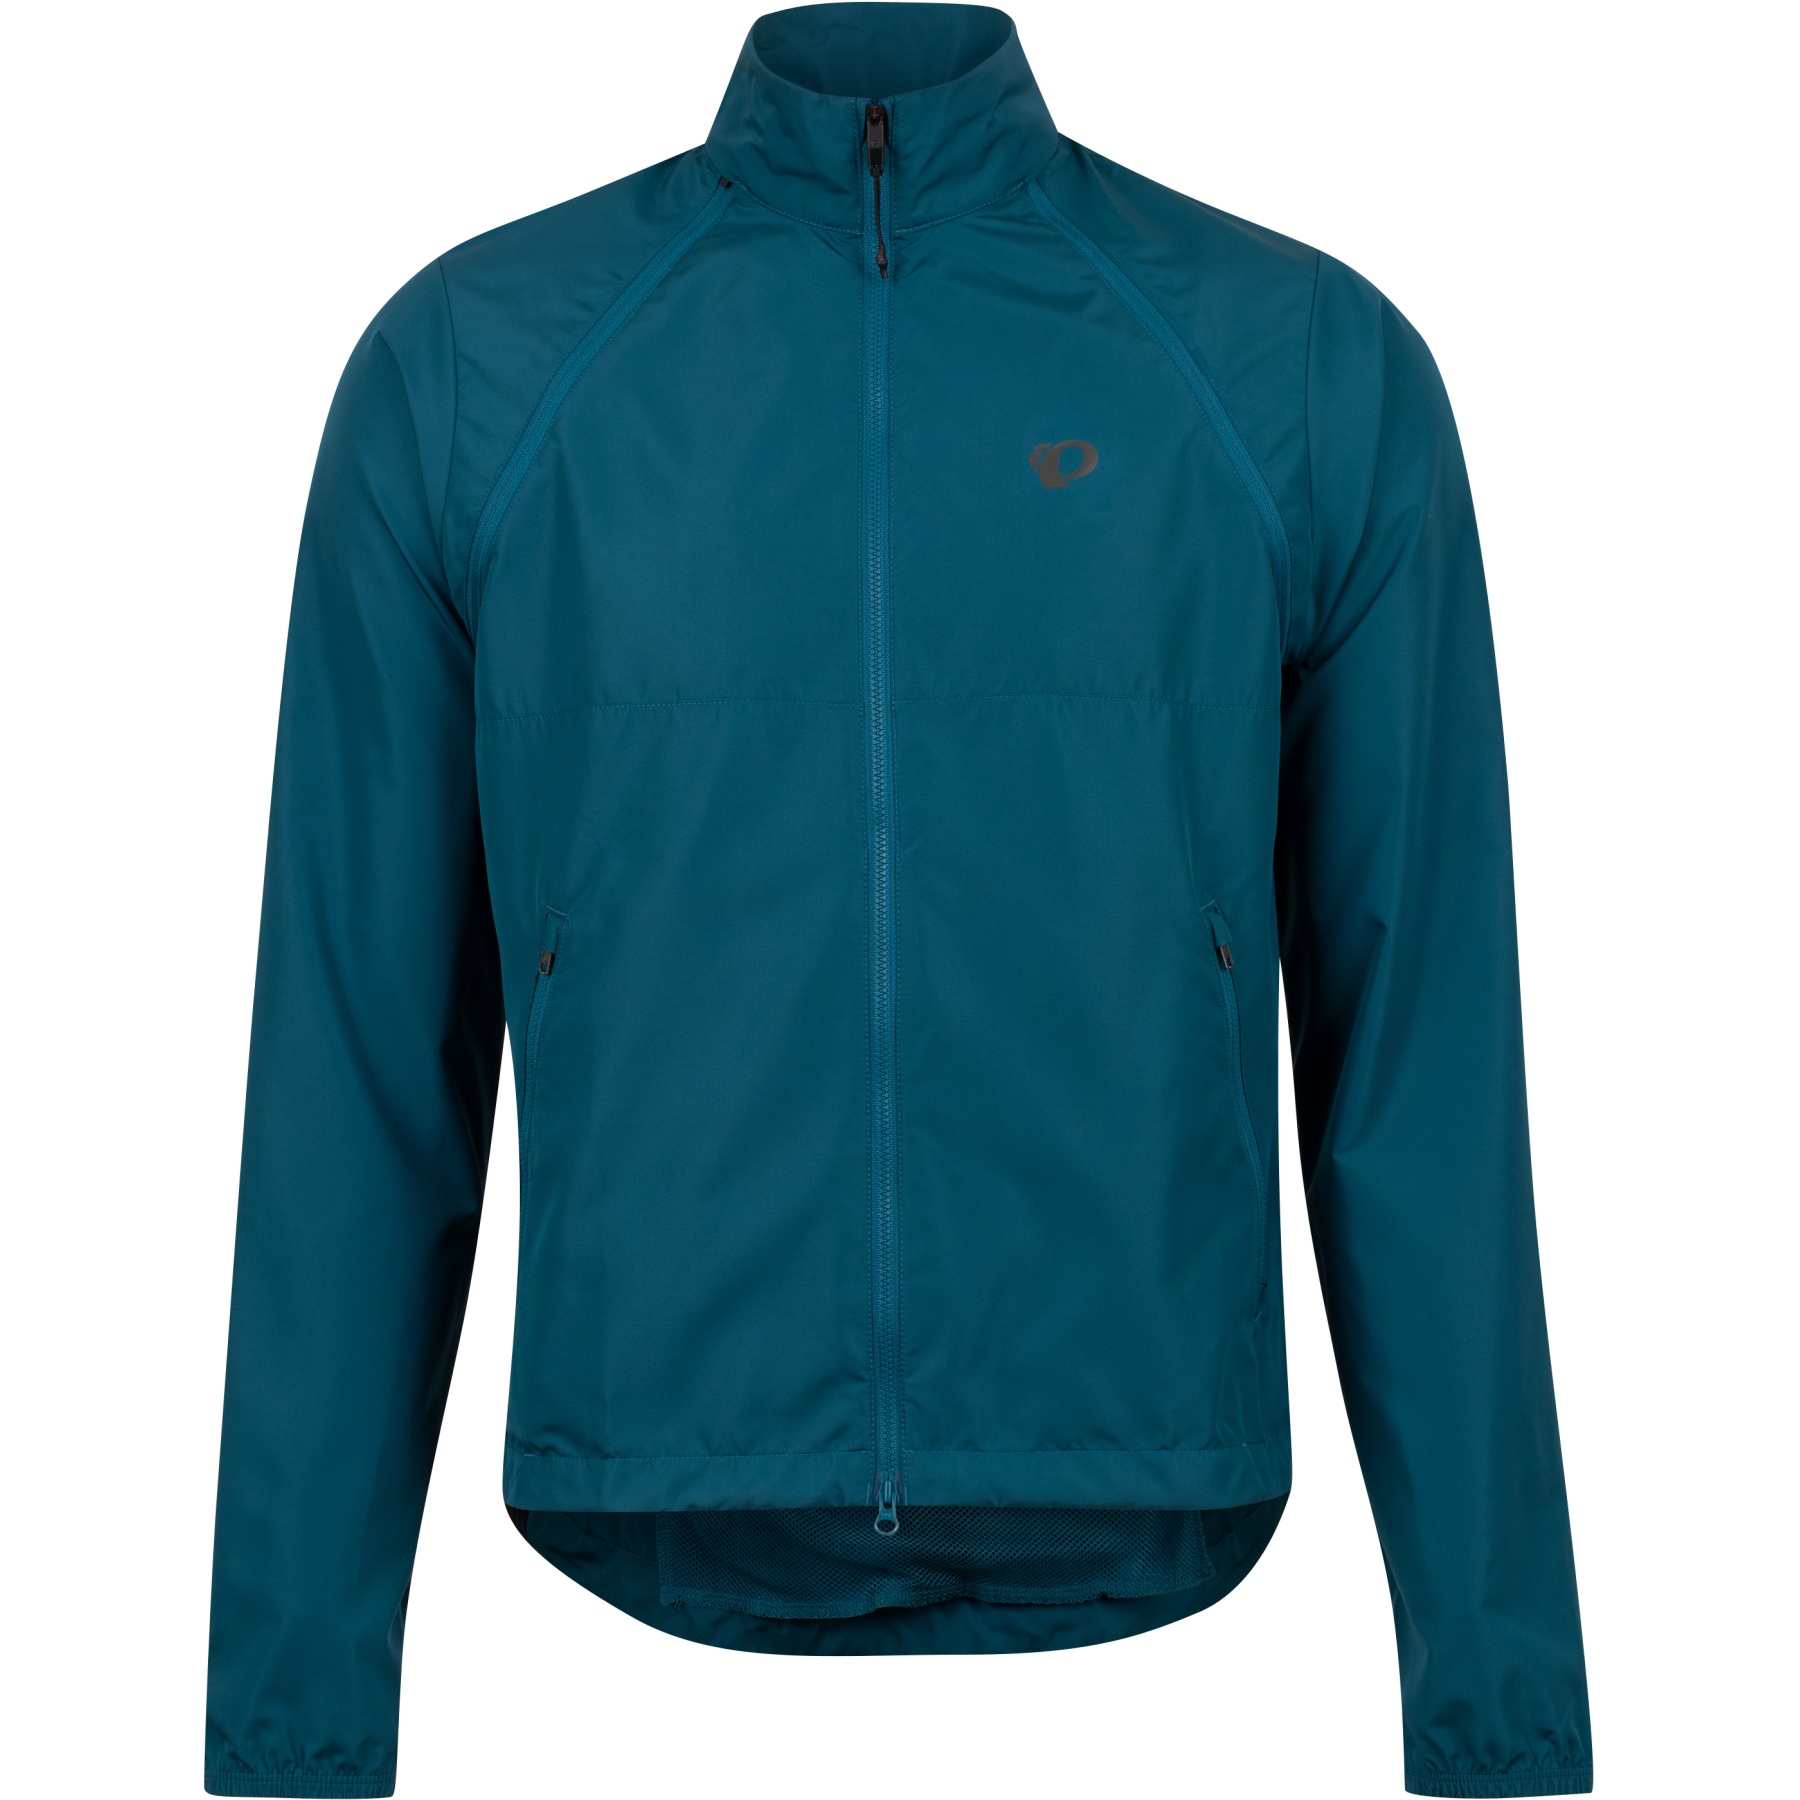 Image of PEARL iZUMi Quest Barrier Convertible Jacket 11132009 - ocean blue - H5M